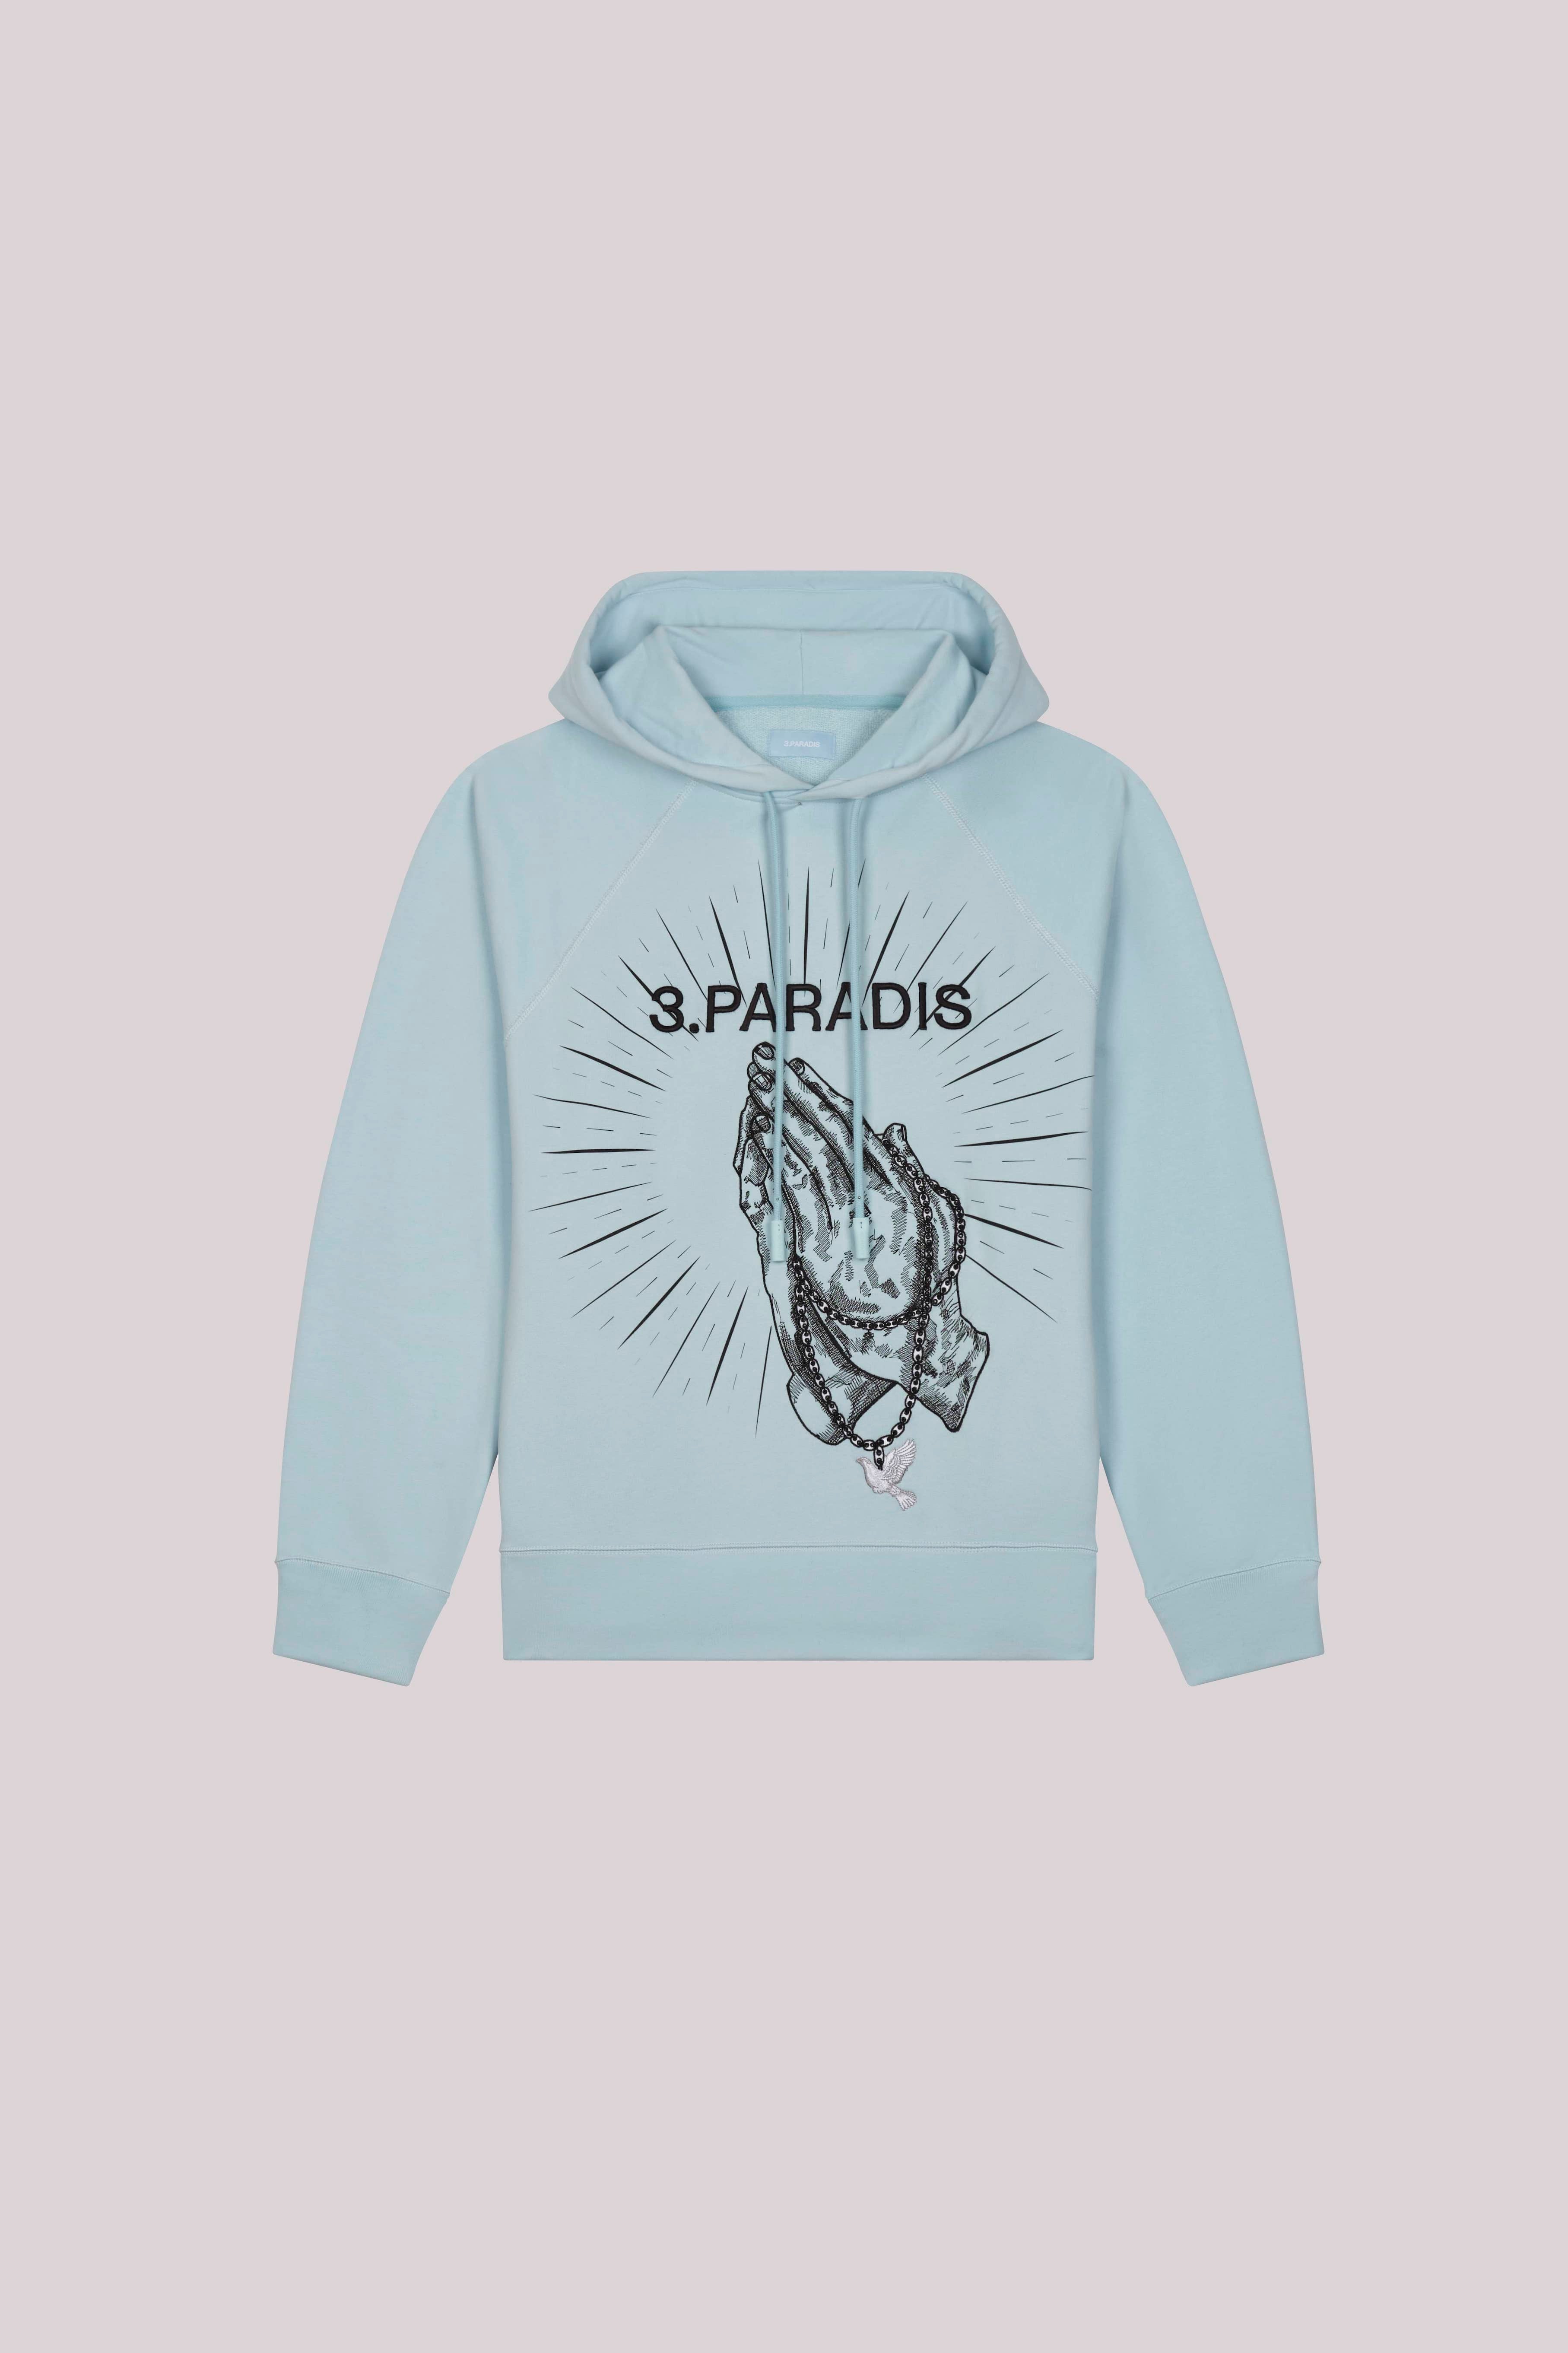 Praying Hands Hooded Sweater